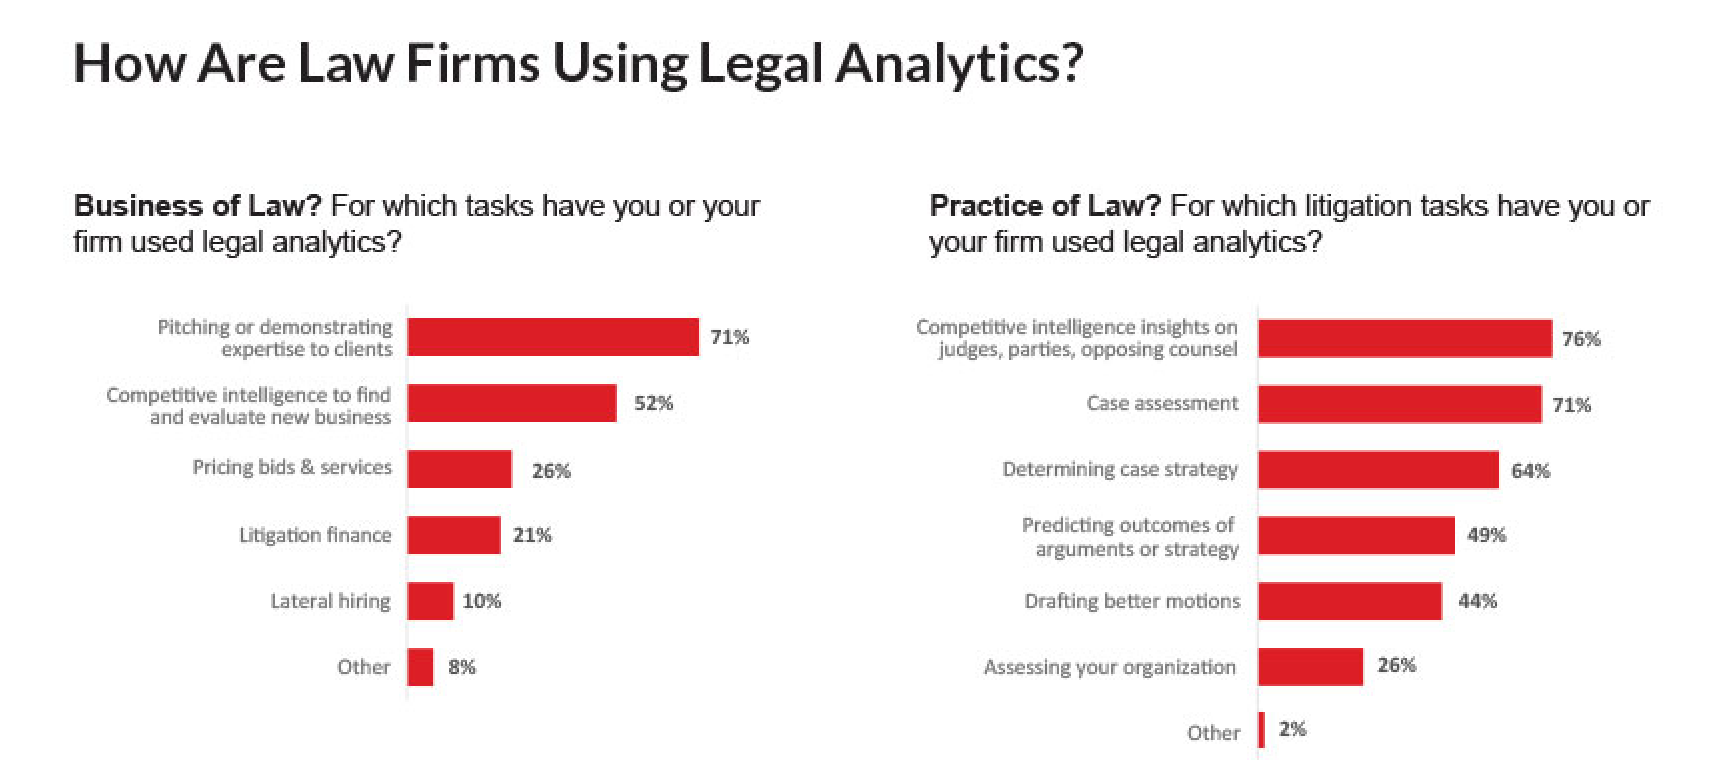 How Are Law Firms Using Legal Analytics? Graphic courtesy of Lex Machina.